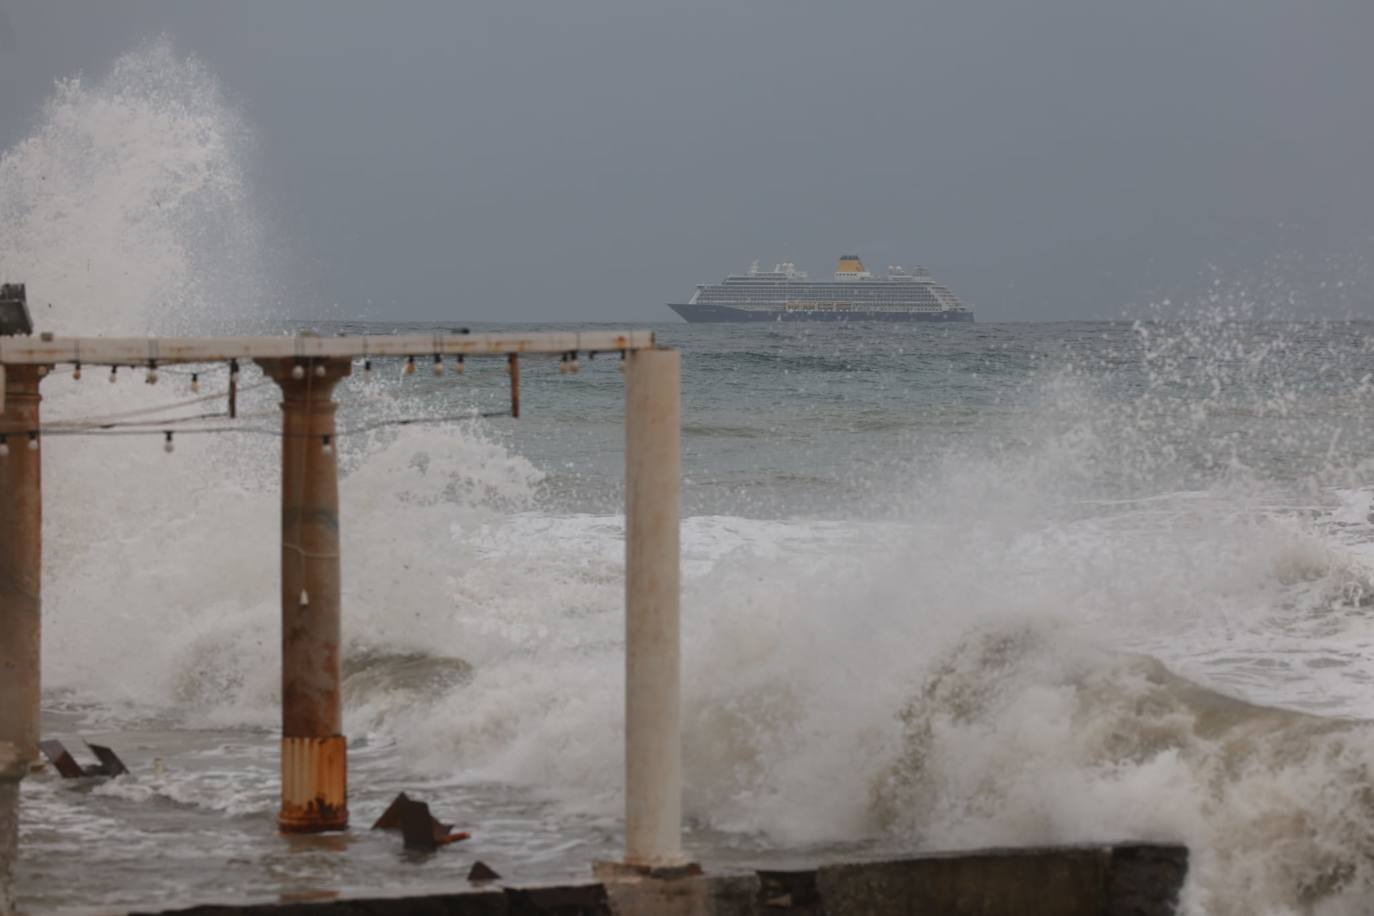 Photographs of the damage to the beaches of the Costa del Sol due to the storm